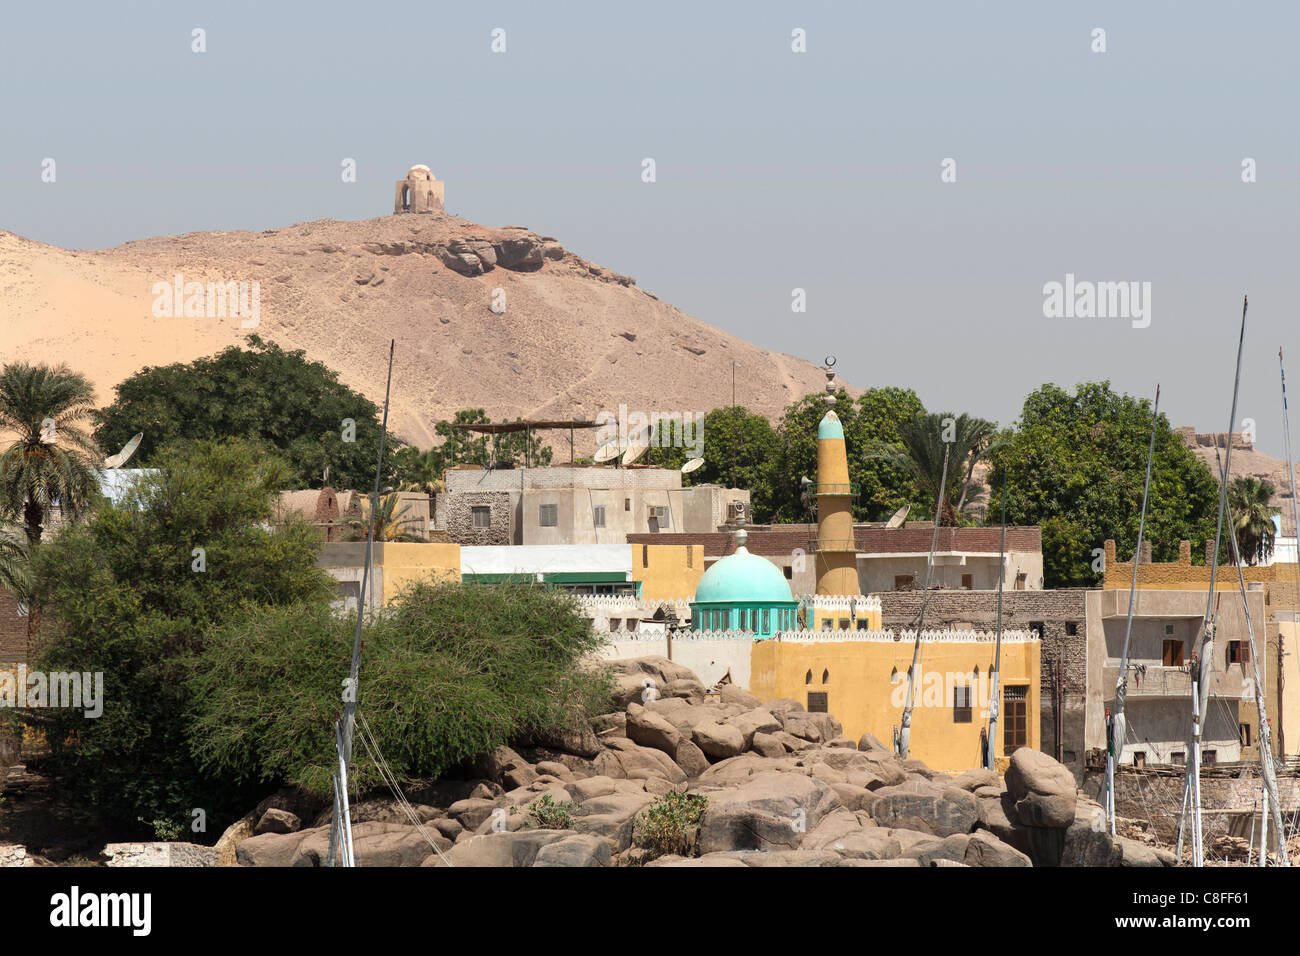 Village settlement seen from the Nile with houses and mosque and shrine on a hill in the background, Aswan, Egypt, Africa Stock Photo